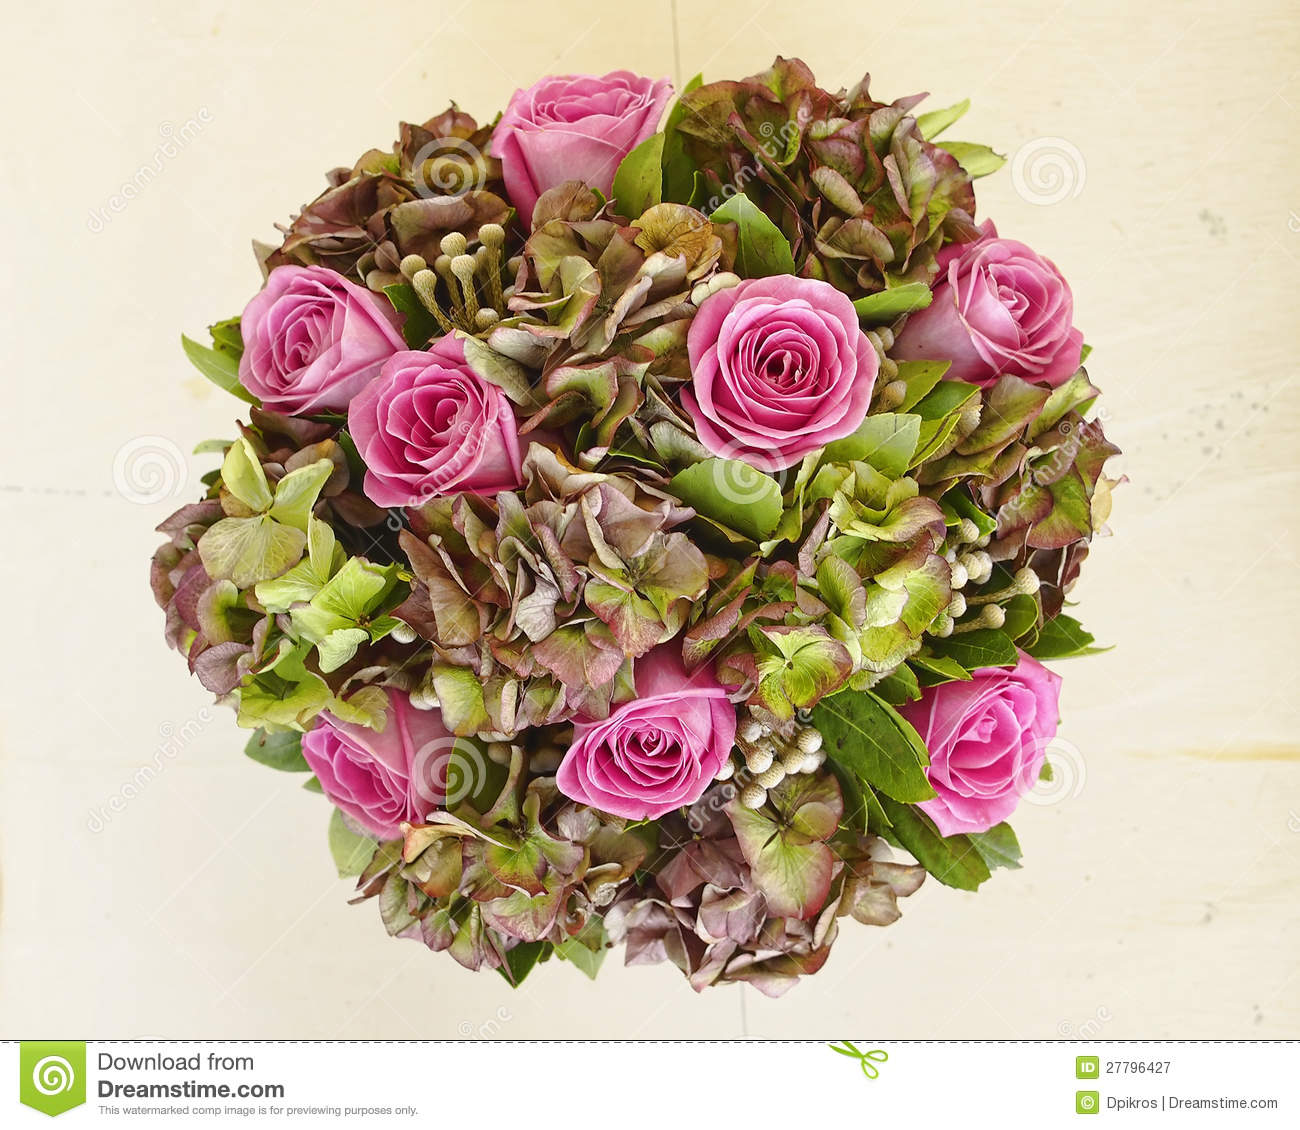 Colorful Roses Bouquet Closeup Royalty Free Stock Photography   Image